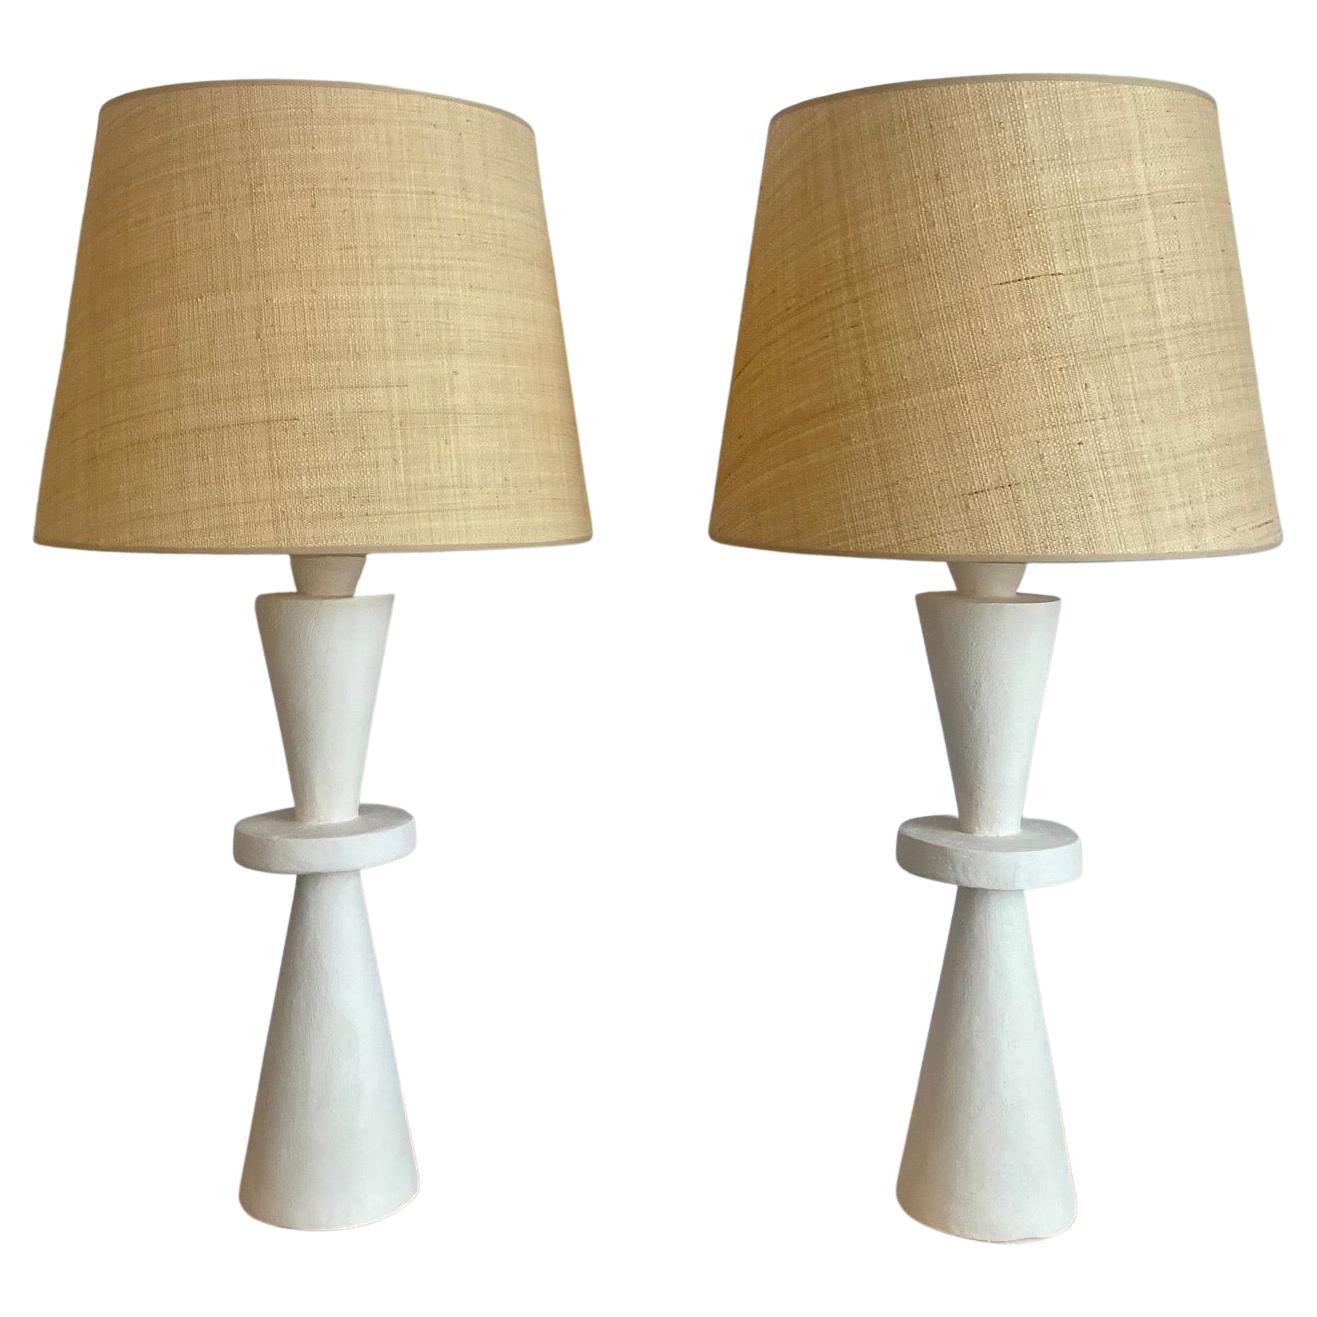 Pair of Stuccoed Plaster Table Lamps